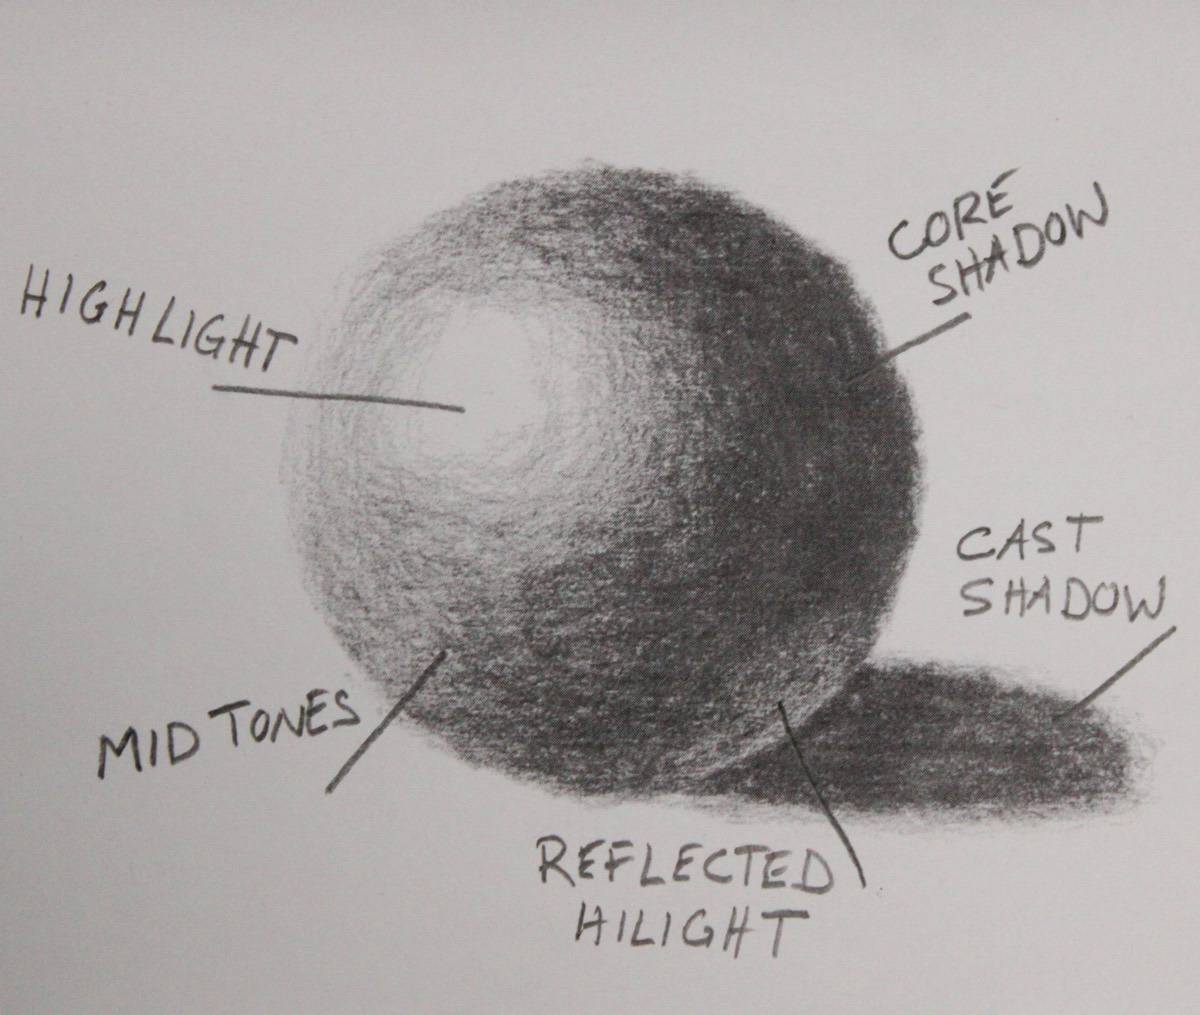 Learn to draw and shade spheres in pencil